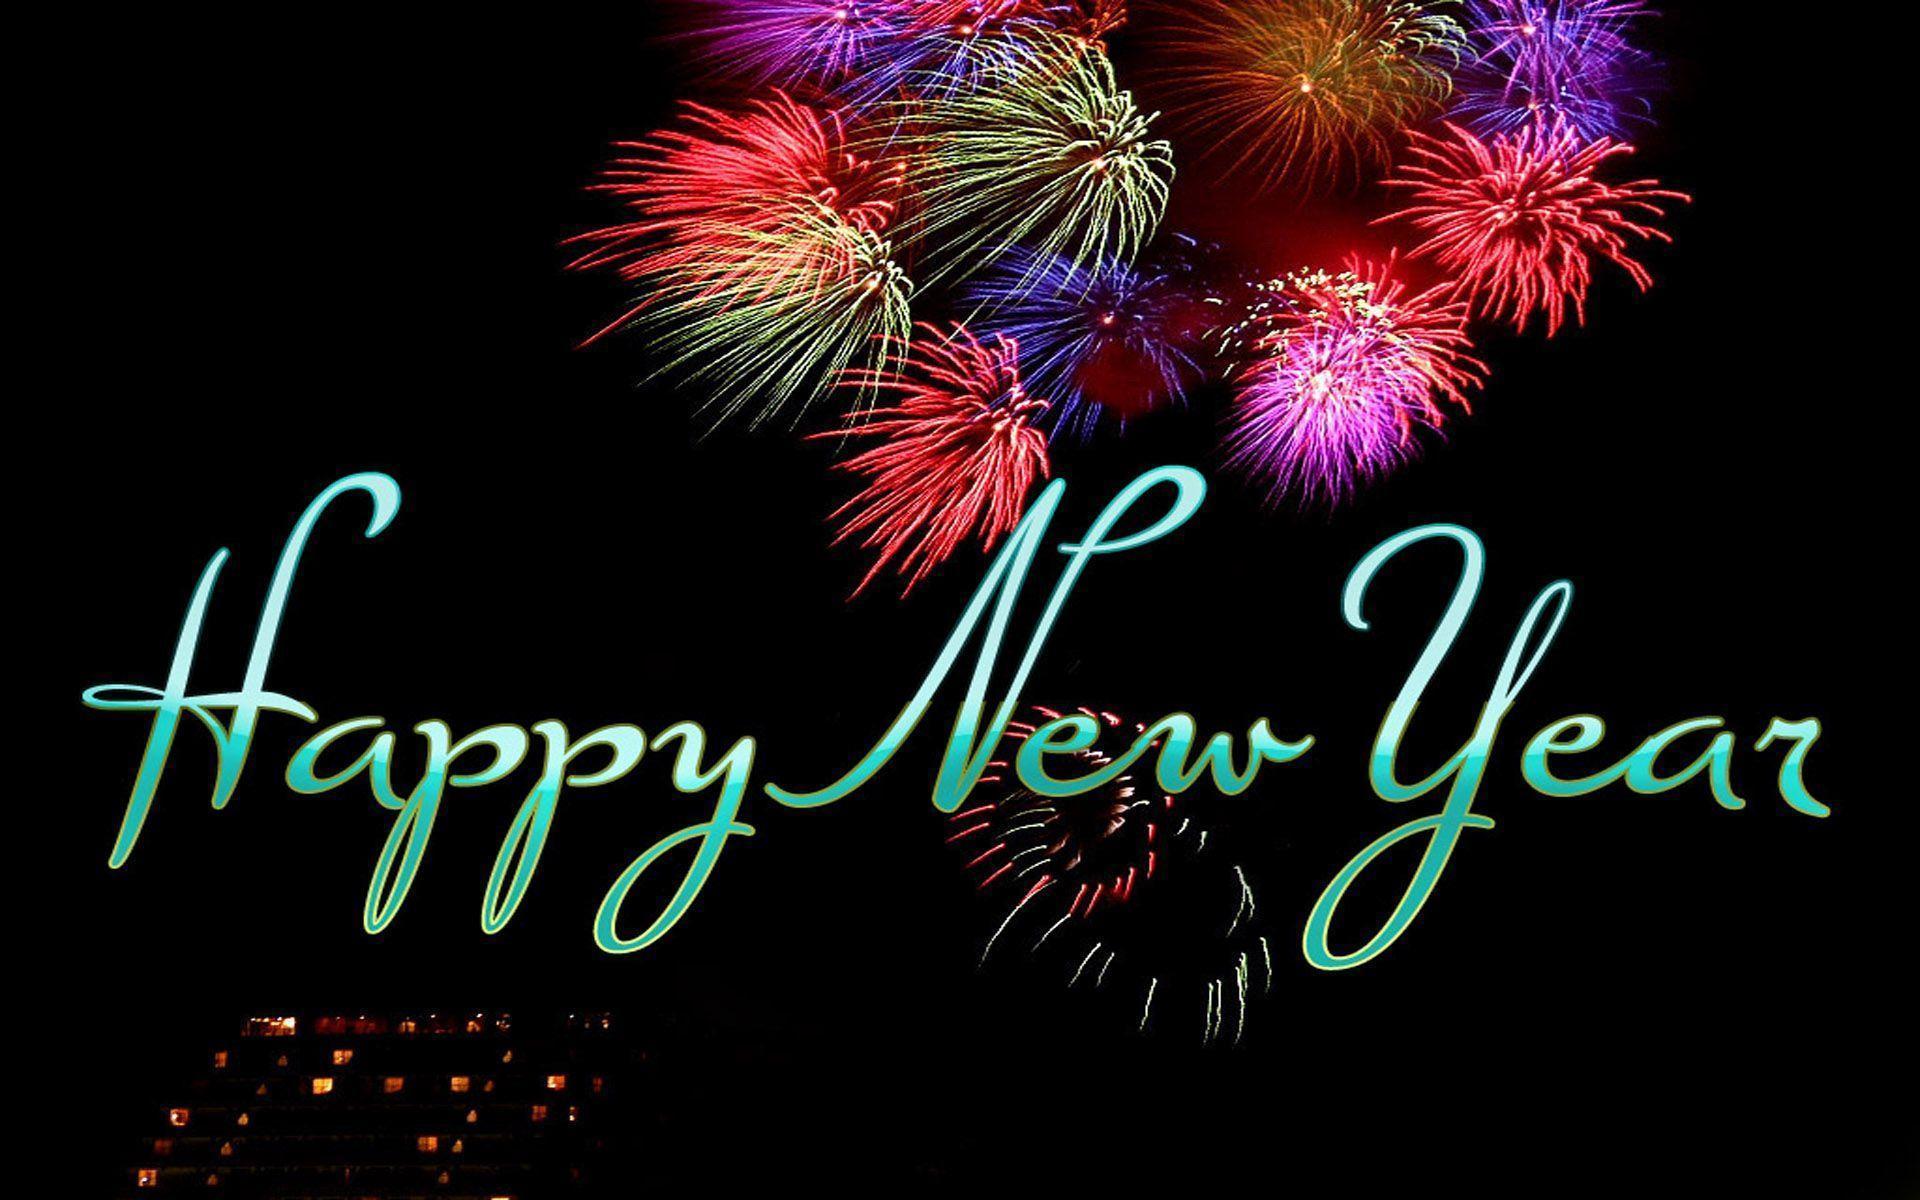 happy new year 2015 wallpaper image Download